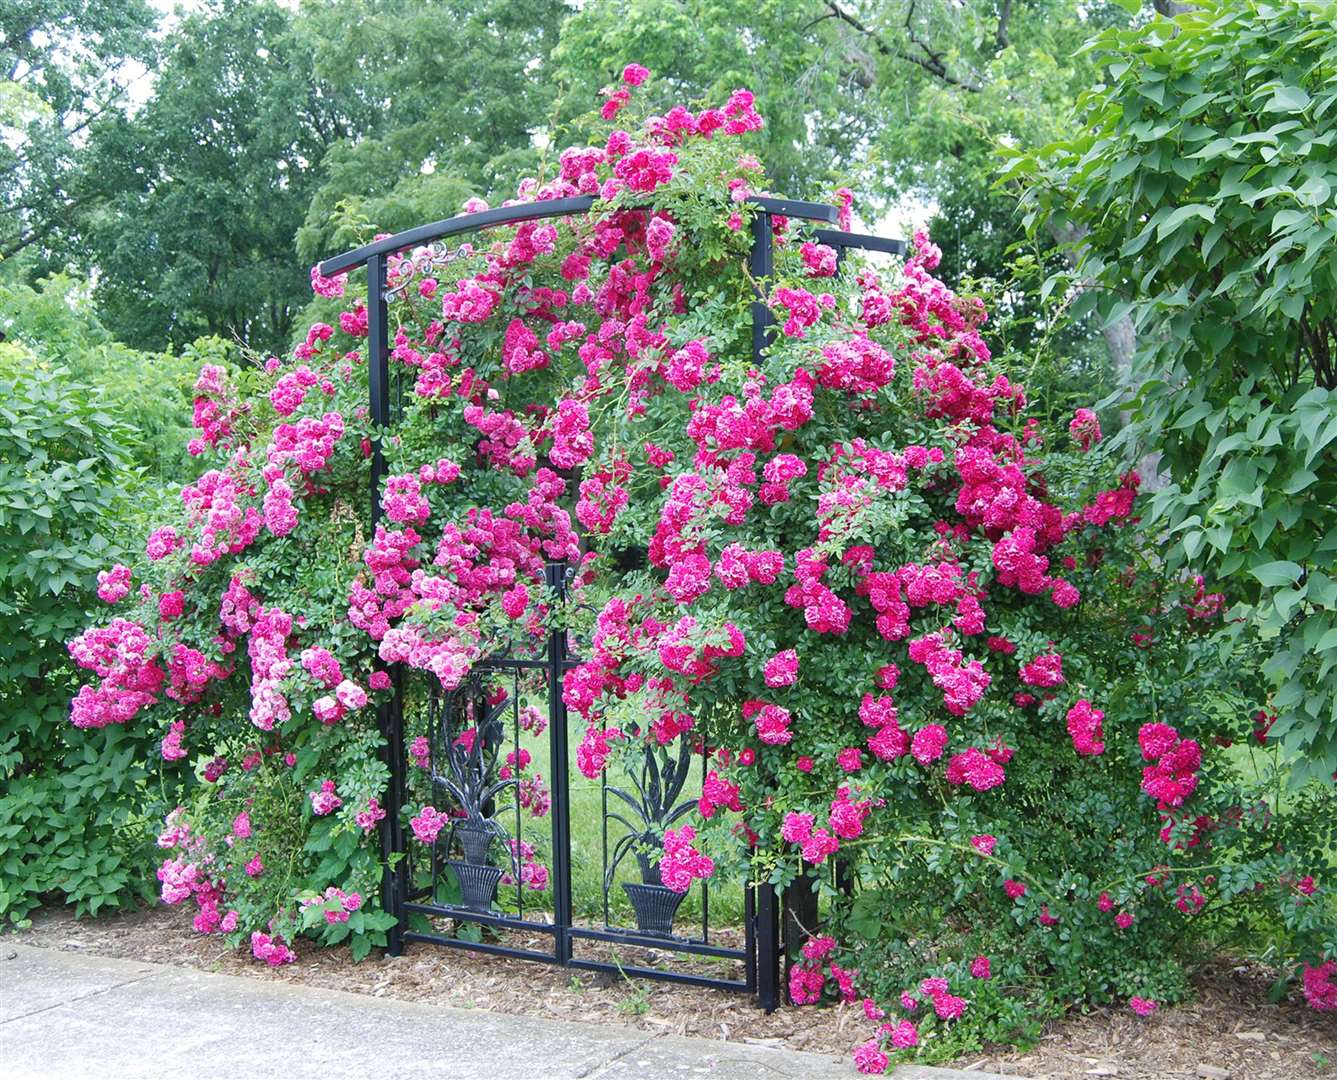 Climbing roses. Picture: iStock/PA